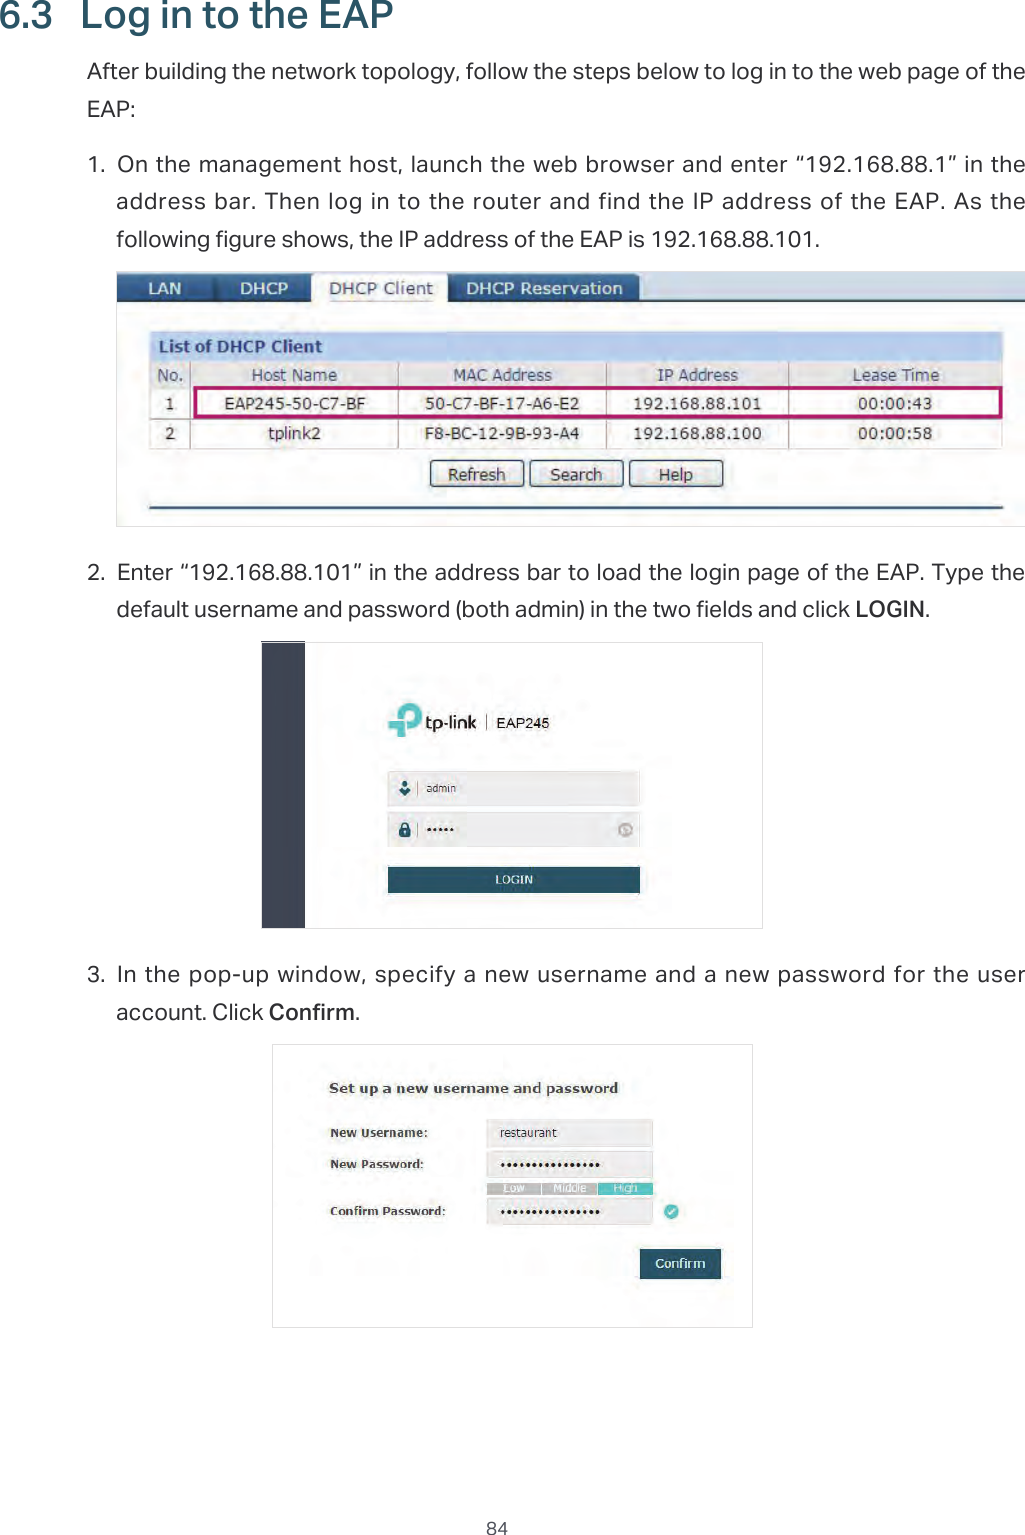  846.3  Log in to the EAPAfter building the network topology, follow the steps below to log in to the web page of the EAP:1. On the management host, launch the web browser and enter “192.168.88.1” in the address bar. Then log in to the router and find the IP address of the EAP. As the following figure shows, the IP address of the EAP is 192.168.88.101.2. Enter “192.168.88.101” in the address bar to load the login page of the EAP. Type the default username and password (both admin) in the two fields and click LOGIN.3. In the pop-up window, specify a new username and a new password for the user account. Click Confirm.